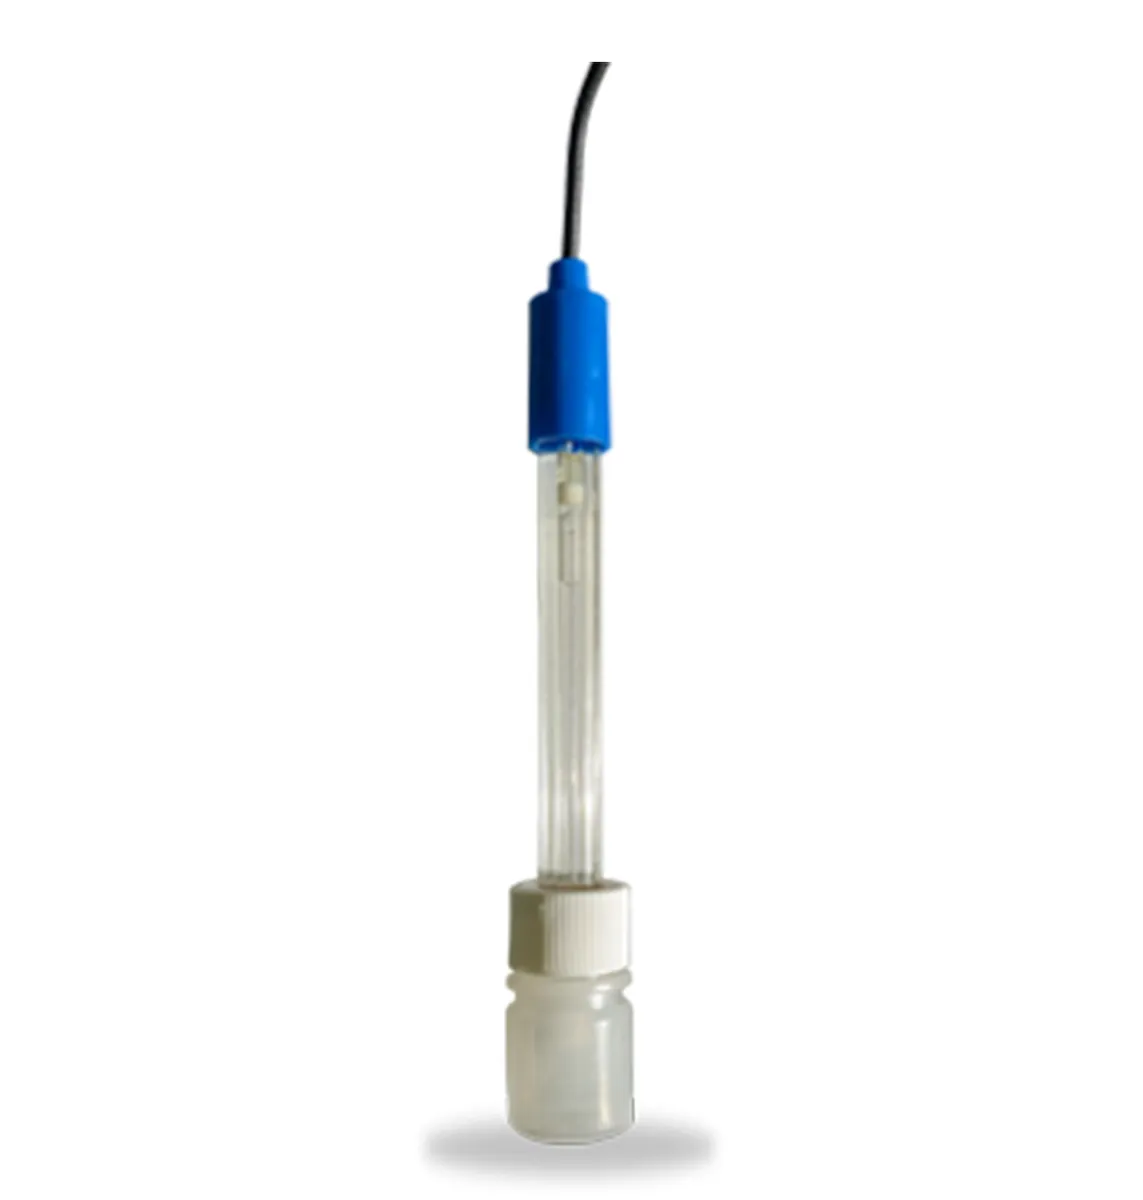 SONDE PH AVEC CABLE 6 M RACER COMPACT/SERENITY